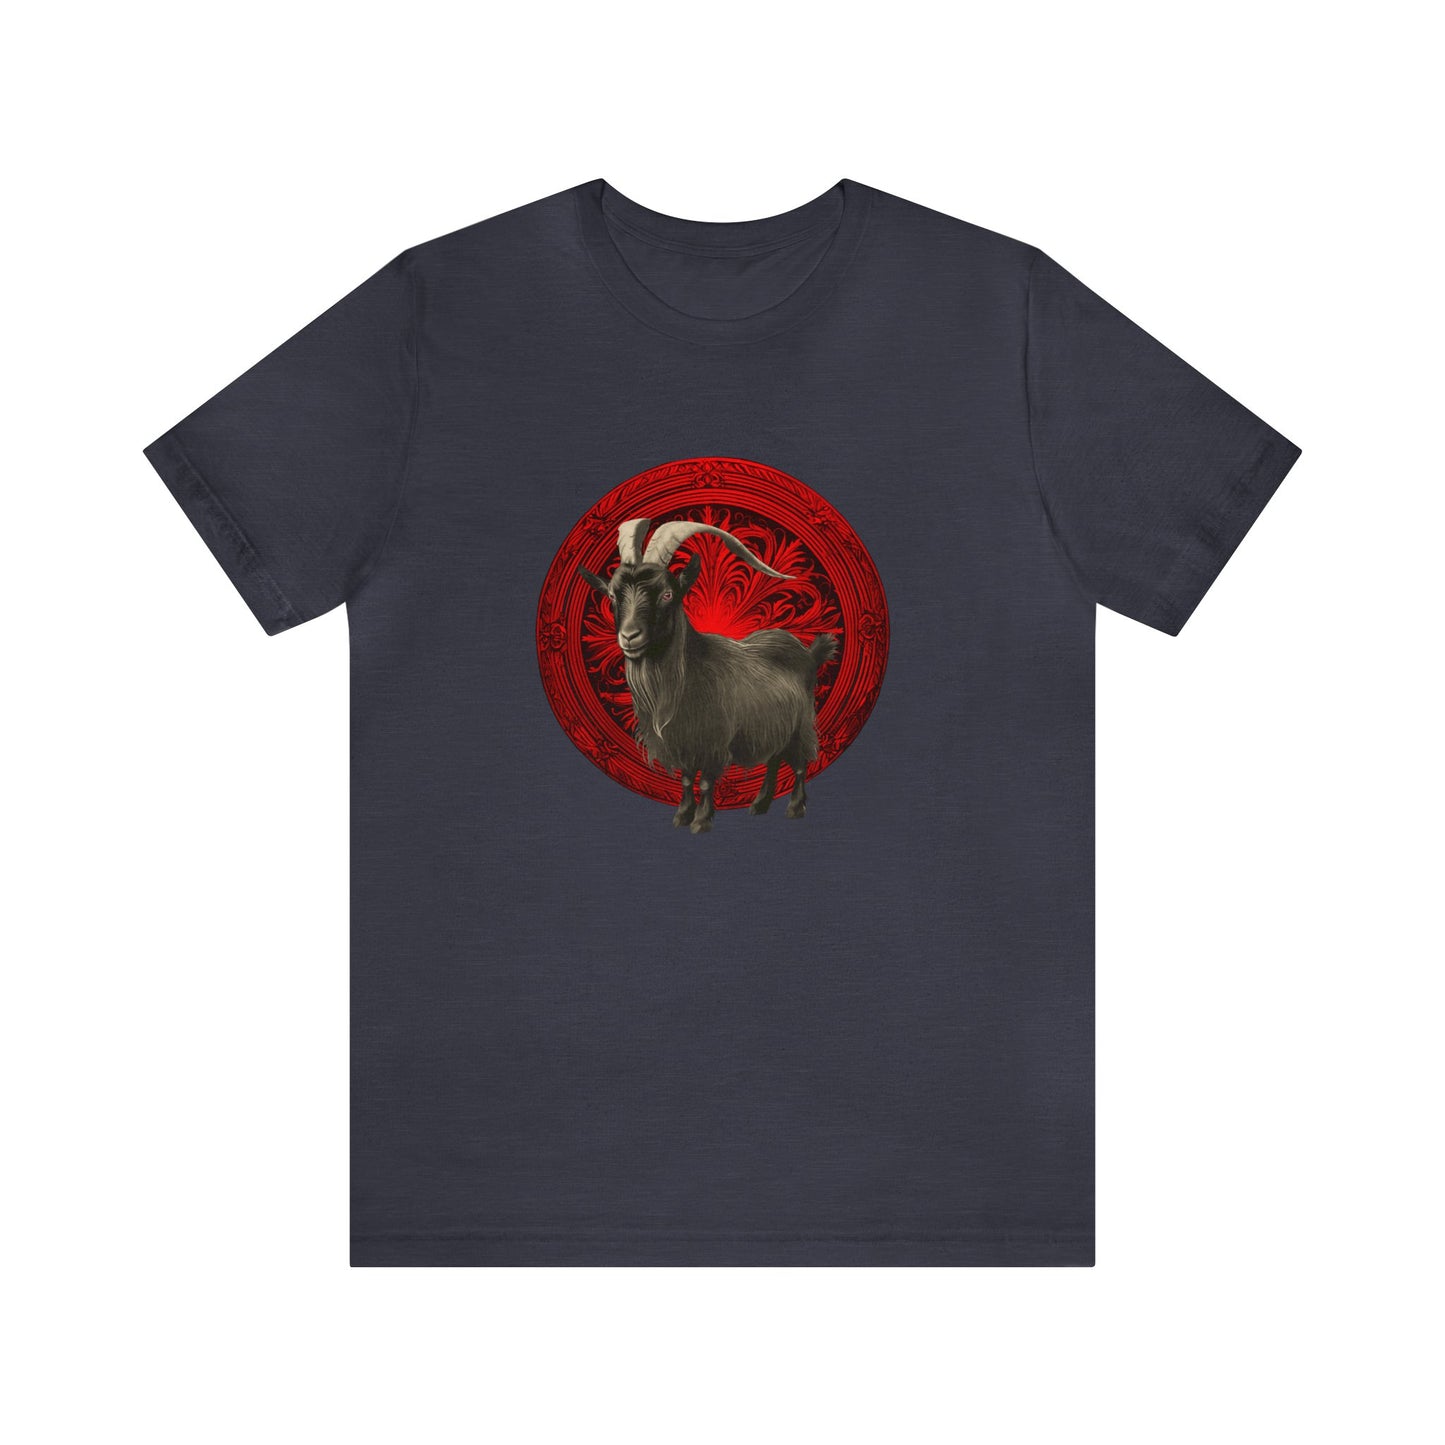 The Witch's Movie Coven "Movie Goat Red" Unisex Jersey Short Sleeve Tee